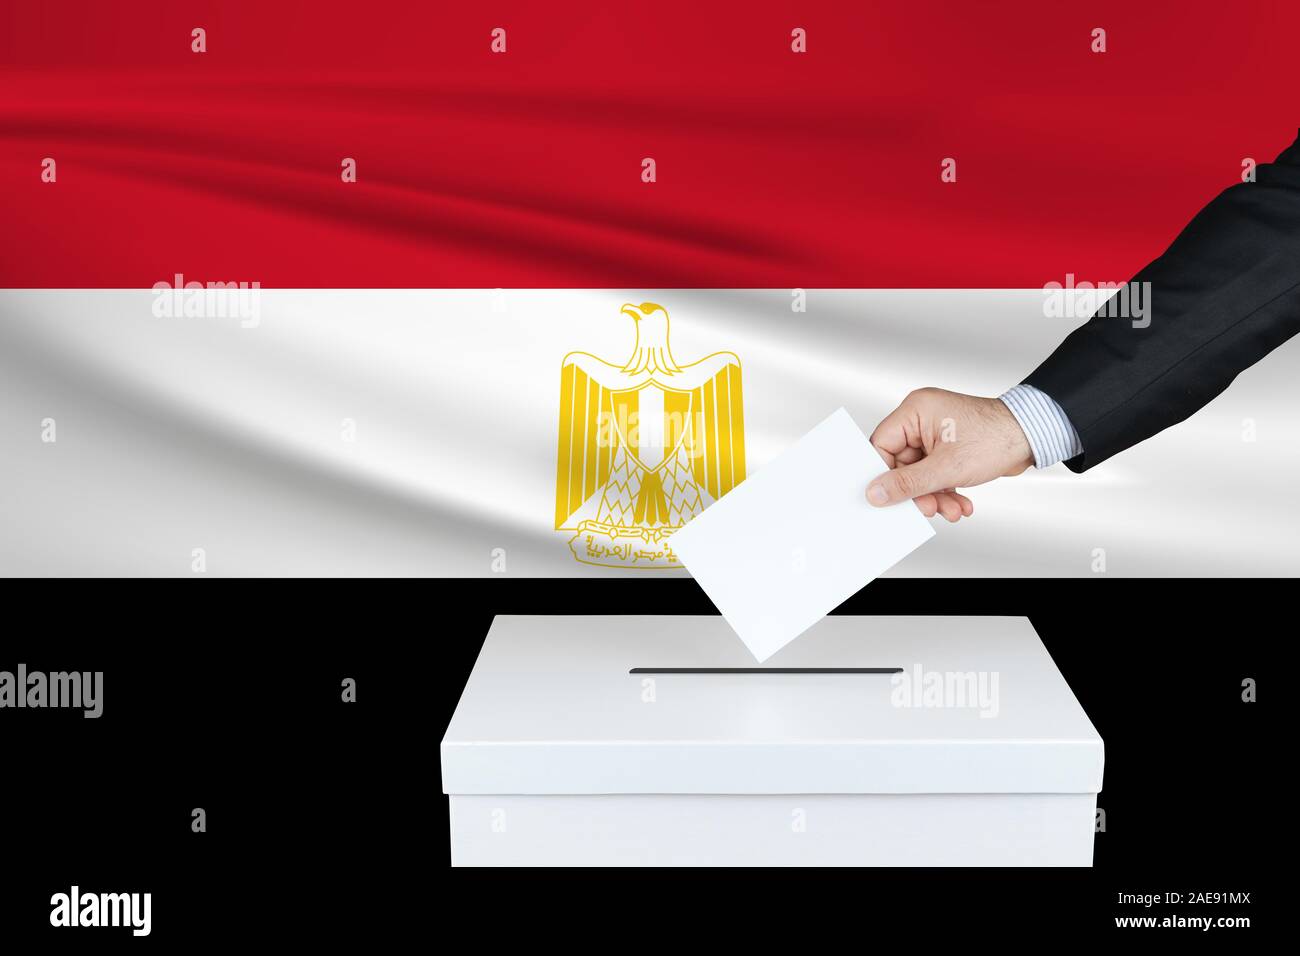 Election in Egypt. The hand of man putting his vote in the ballot box. Waved Egypt flag on background. Stock Photo